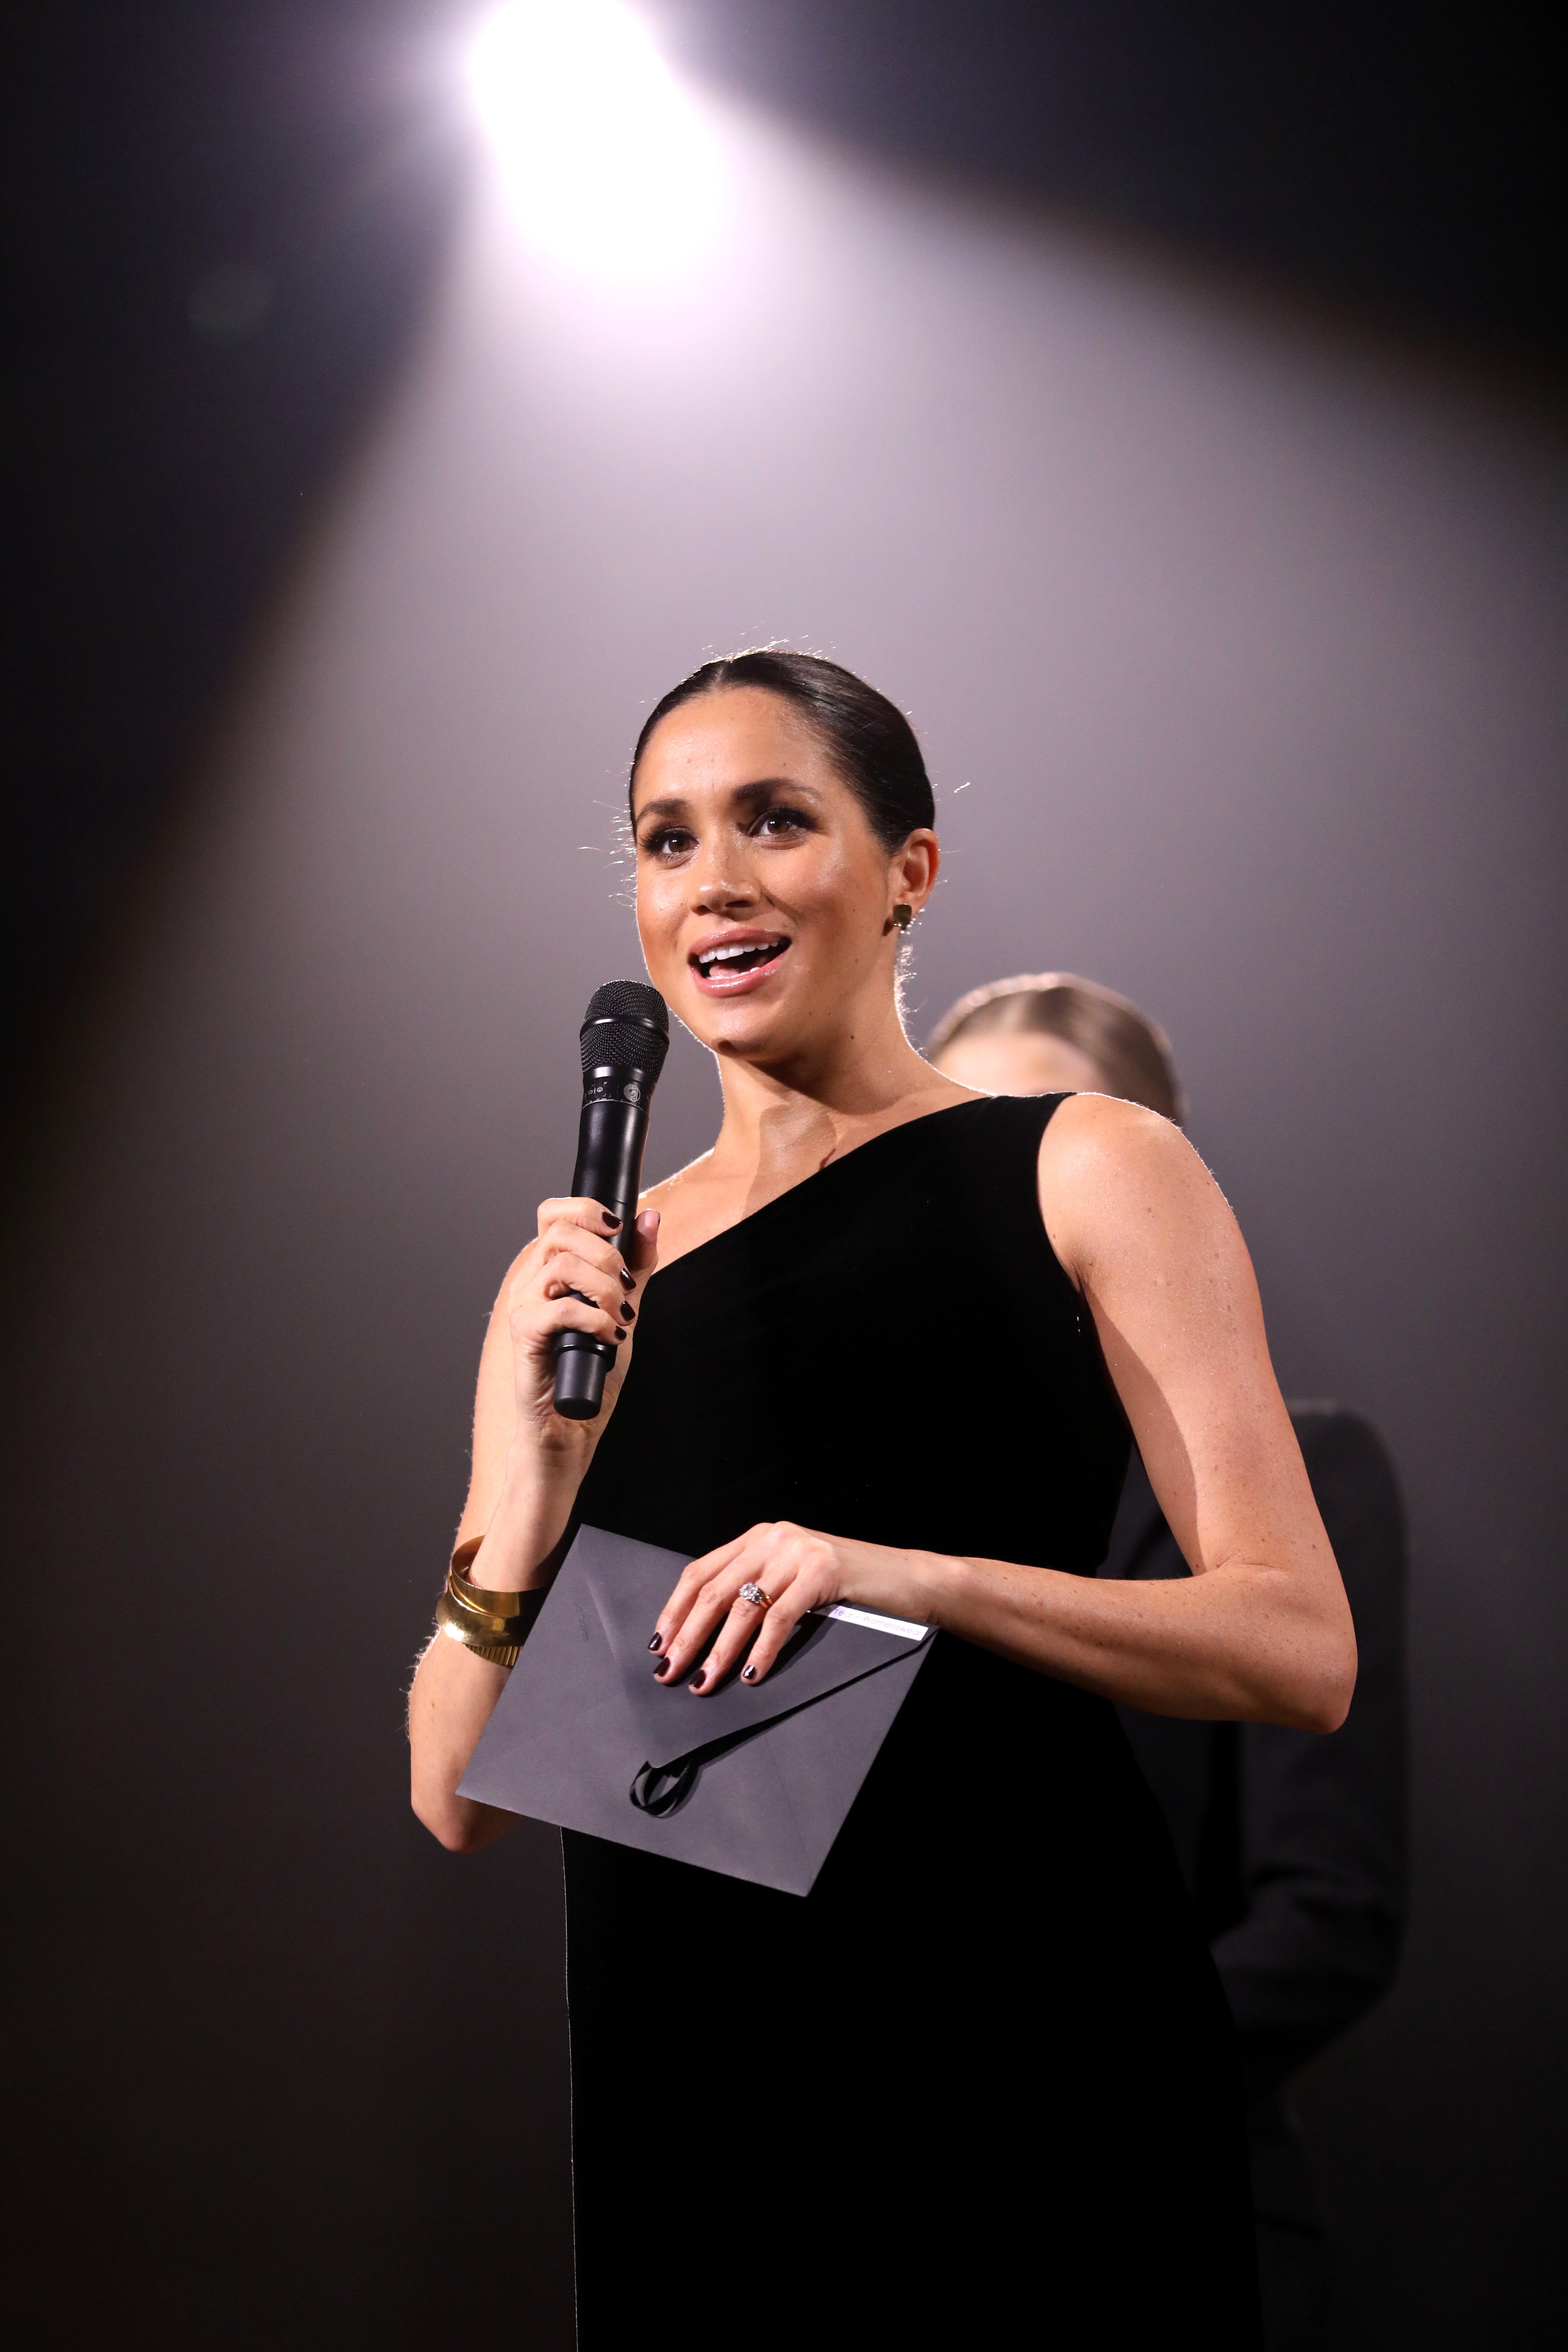 Meghan Markle at the British Fashion Awards in December 2018 | Photo: Getty Images